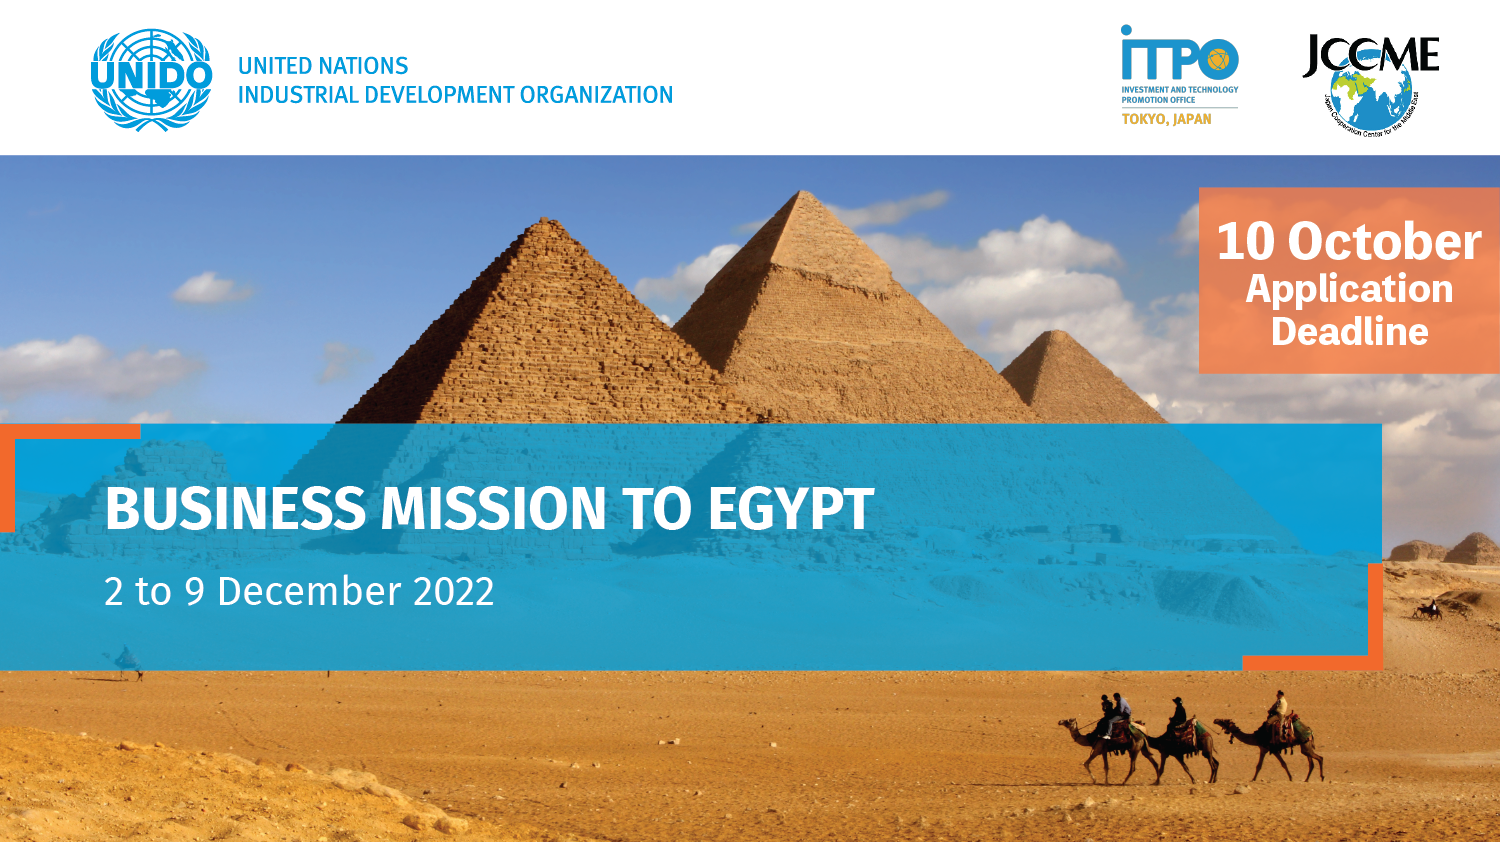 “Business Mission to Egypt” sponsored by JCCME and UNIDO (Deadline 10/